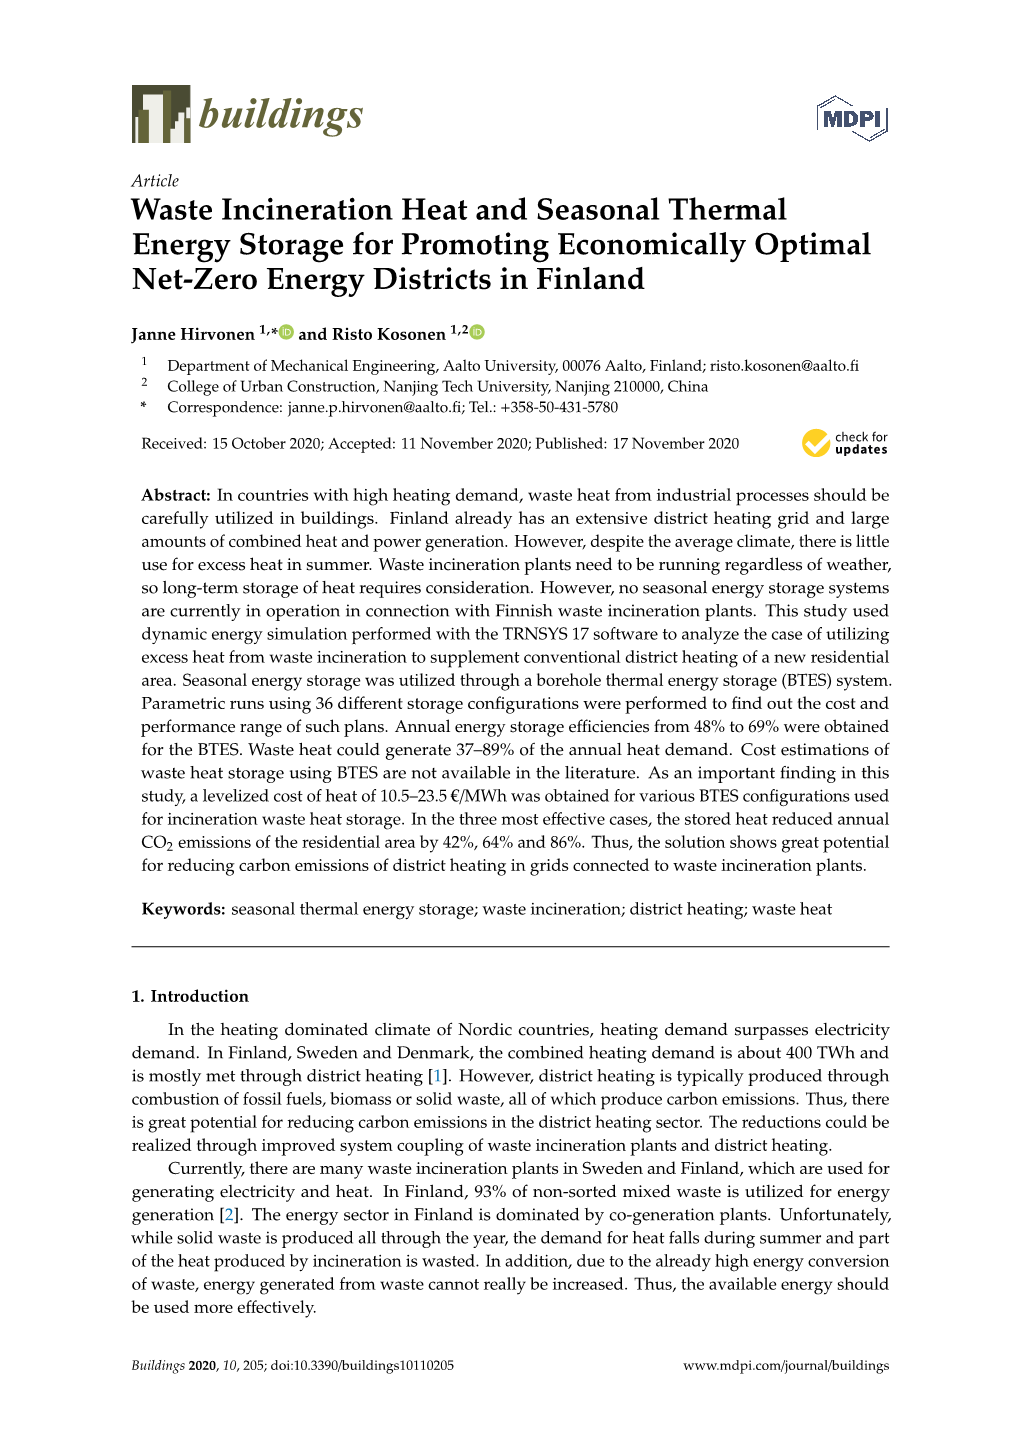 Waste Incineration Heat and Seasonal Thermal Energy Storage for Promoting Economically Optimal Net-Zero Energy Districts in Finland